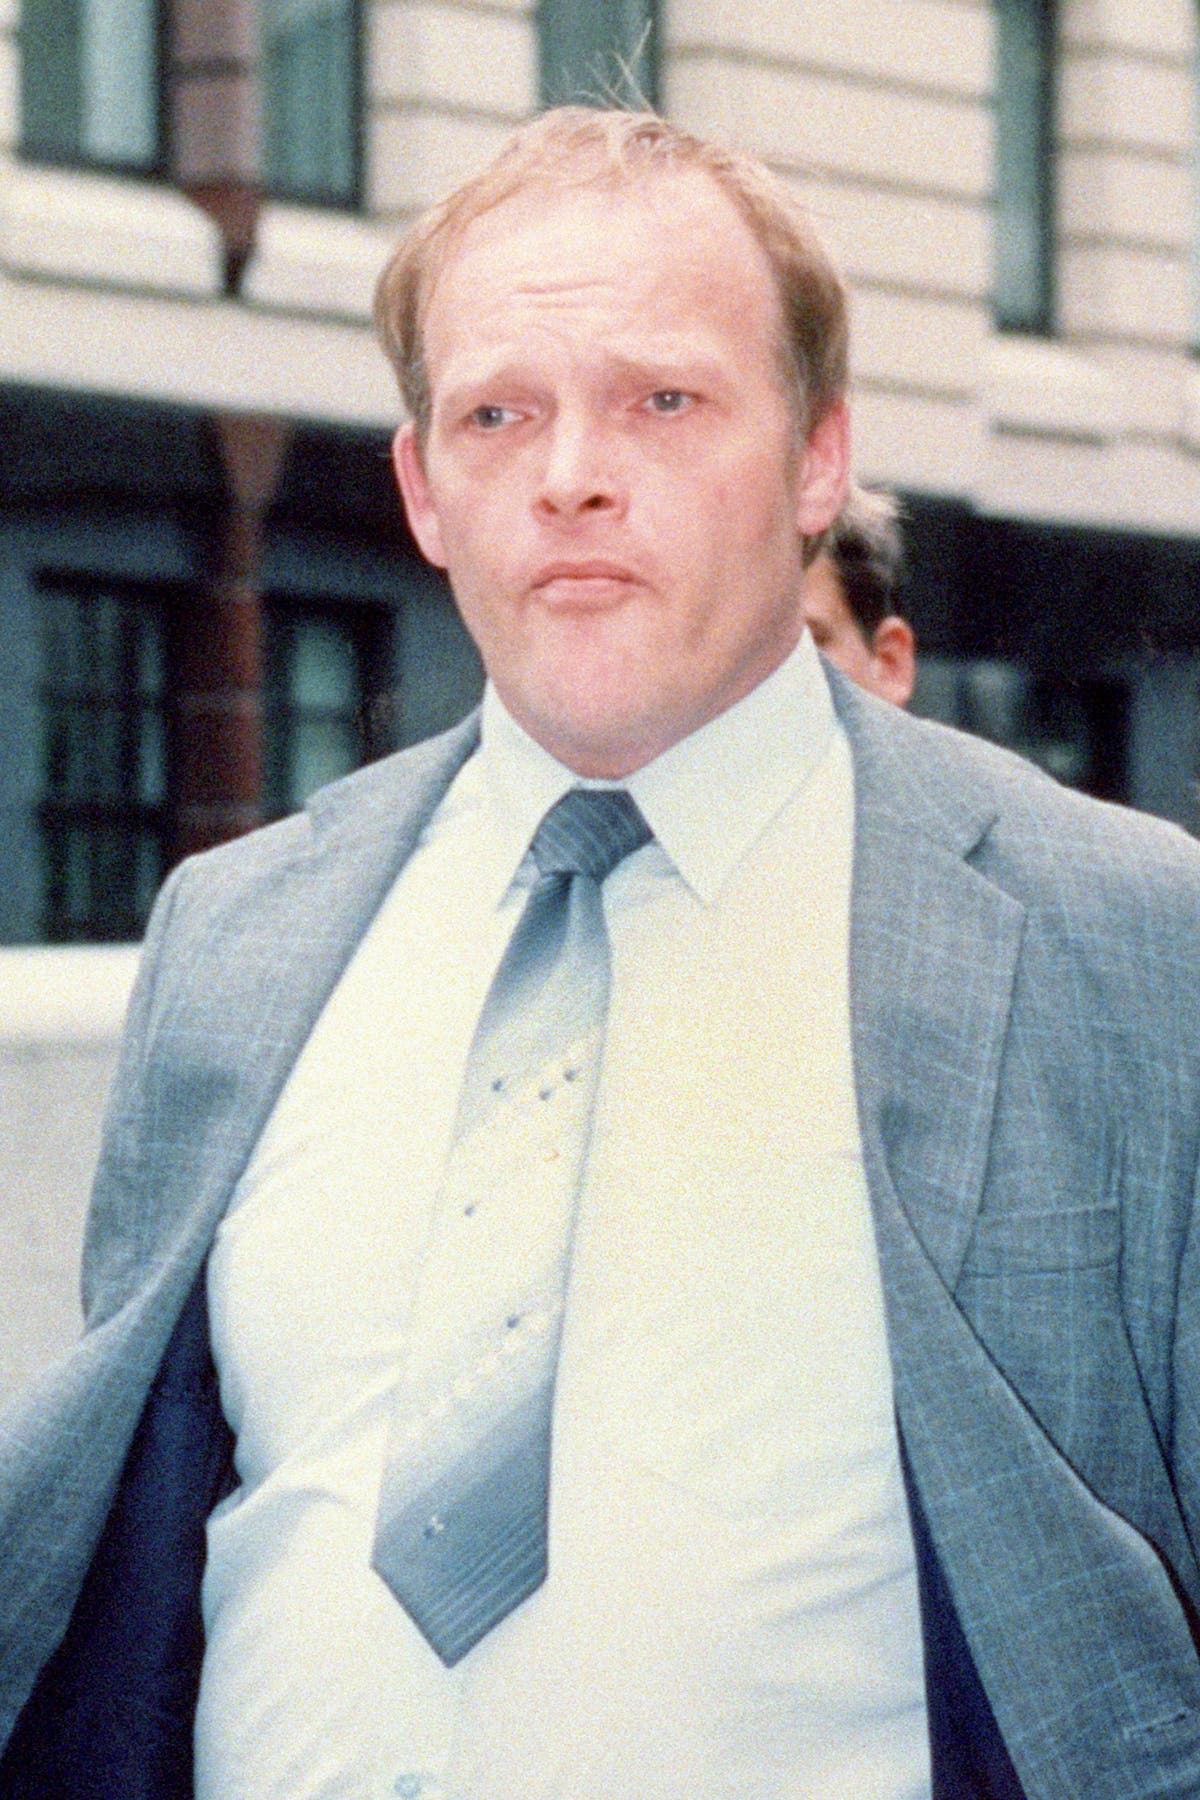 ‘Sadistic sexual killer’ jailed for murder 30 years after he was cleared of the crime